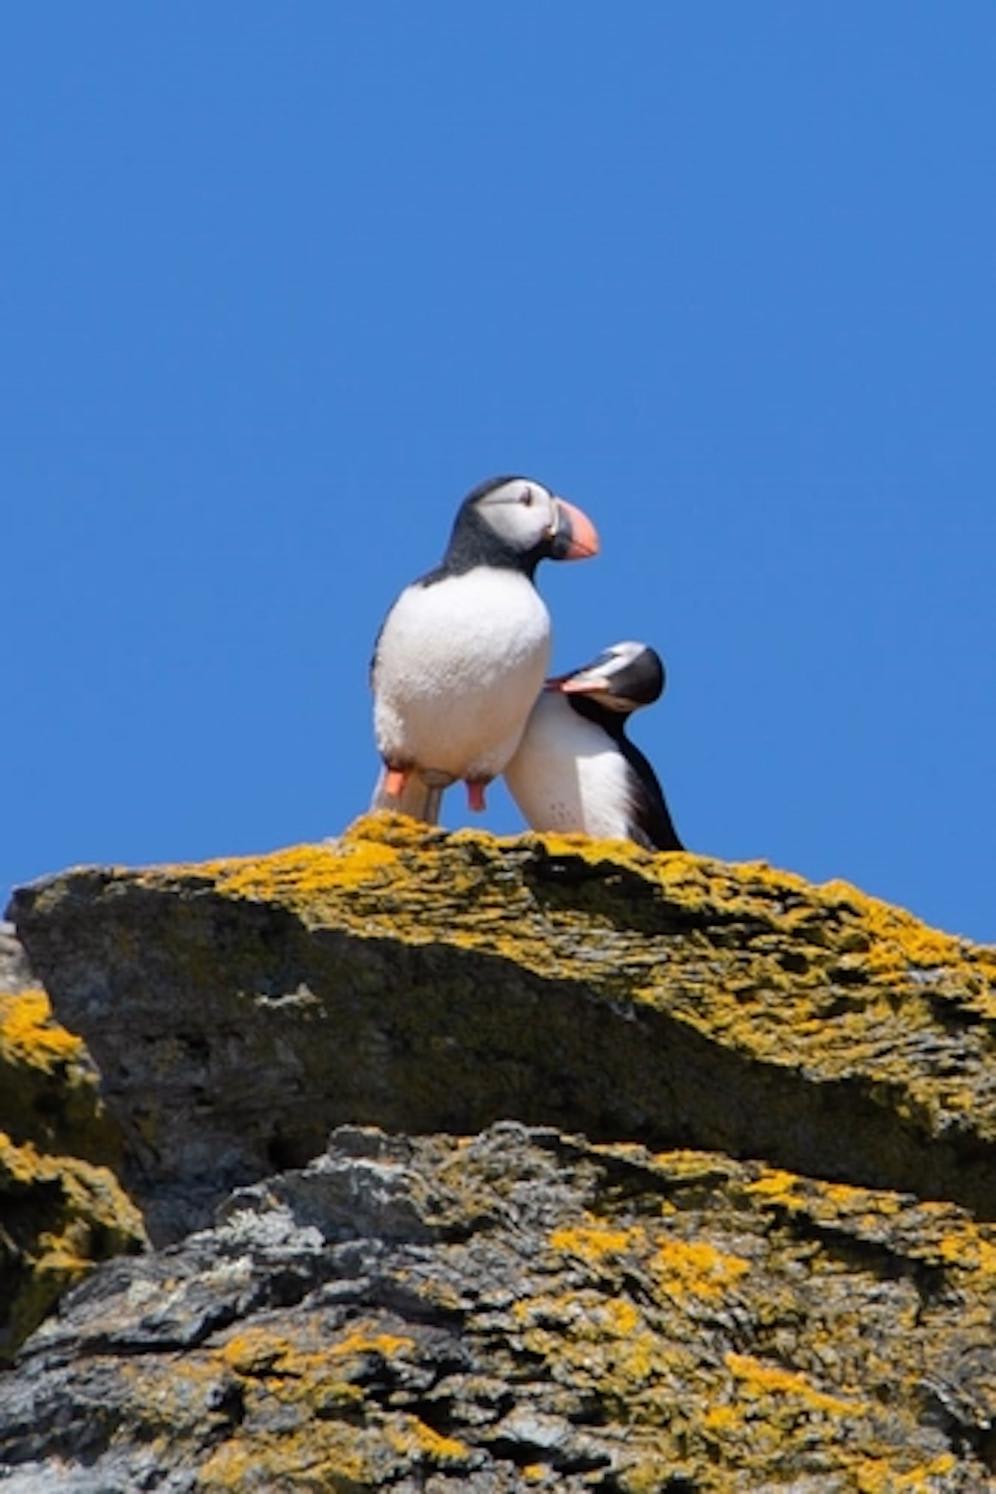 Thanks to the clever use of puffikins (manikin puffins) and recorded calls, following a brown rat eradication programme Atlantic Puffins have been seen with nesting material on The Isle of Man after an absence of 30 years. This is a hopeful sign that they might be settling there and breeding again.